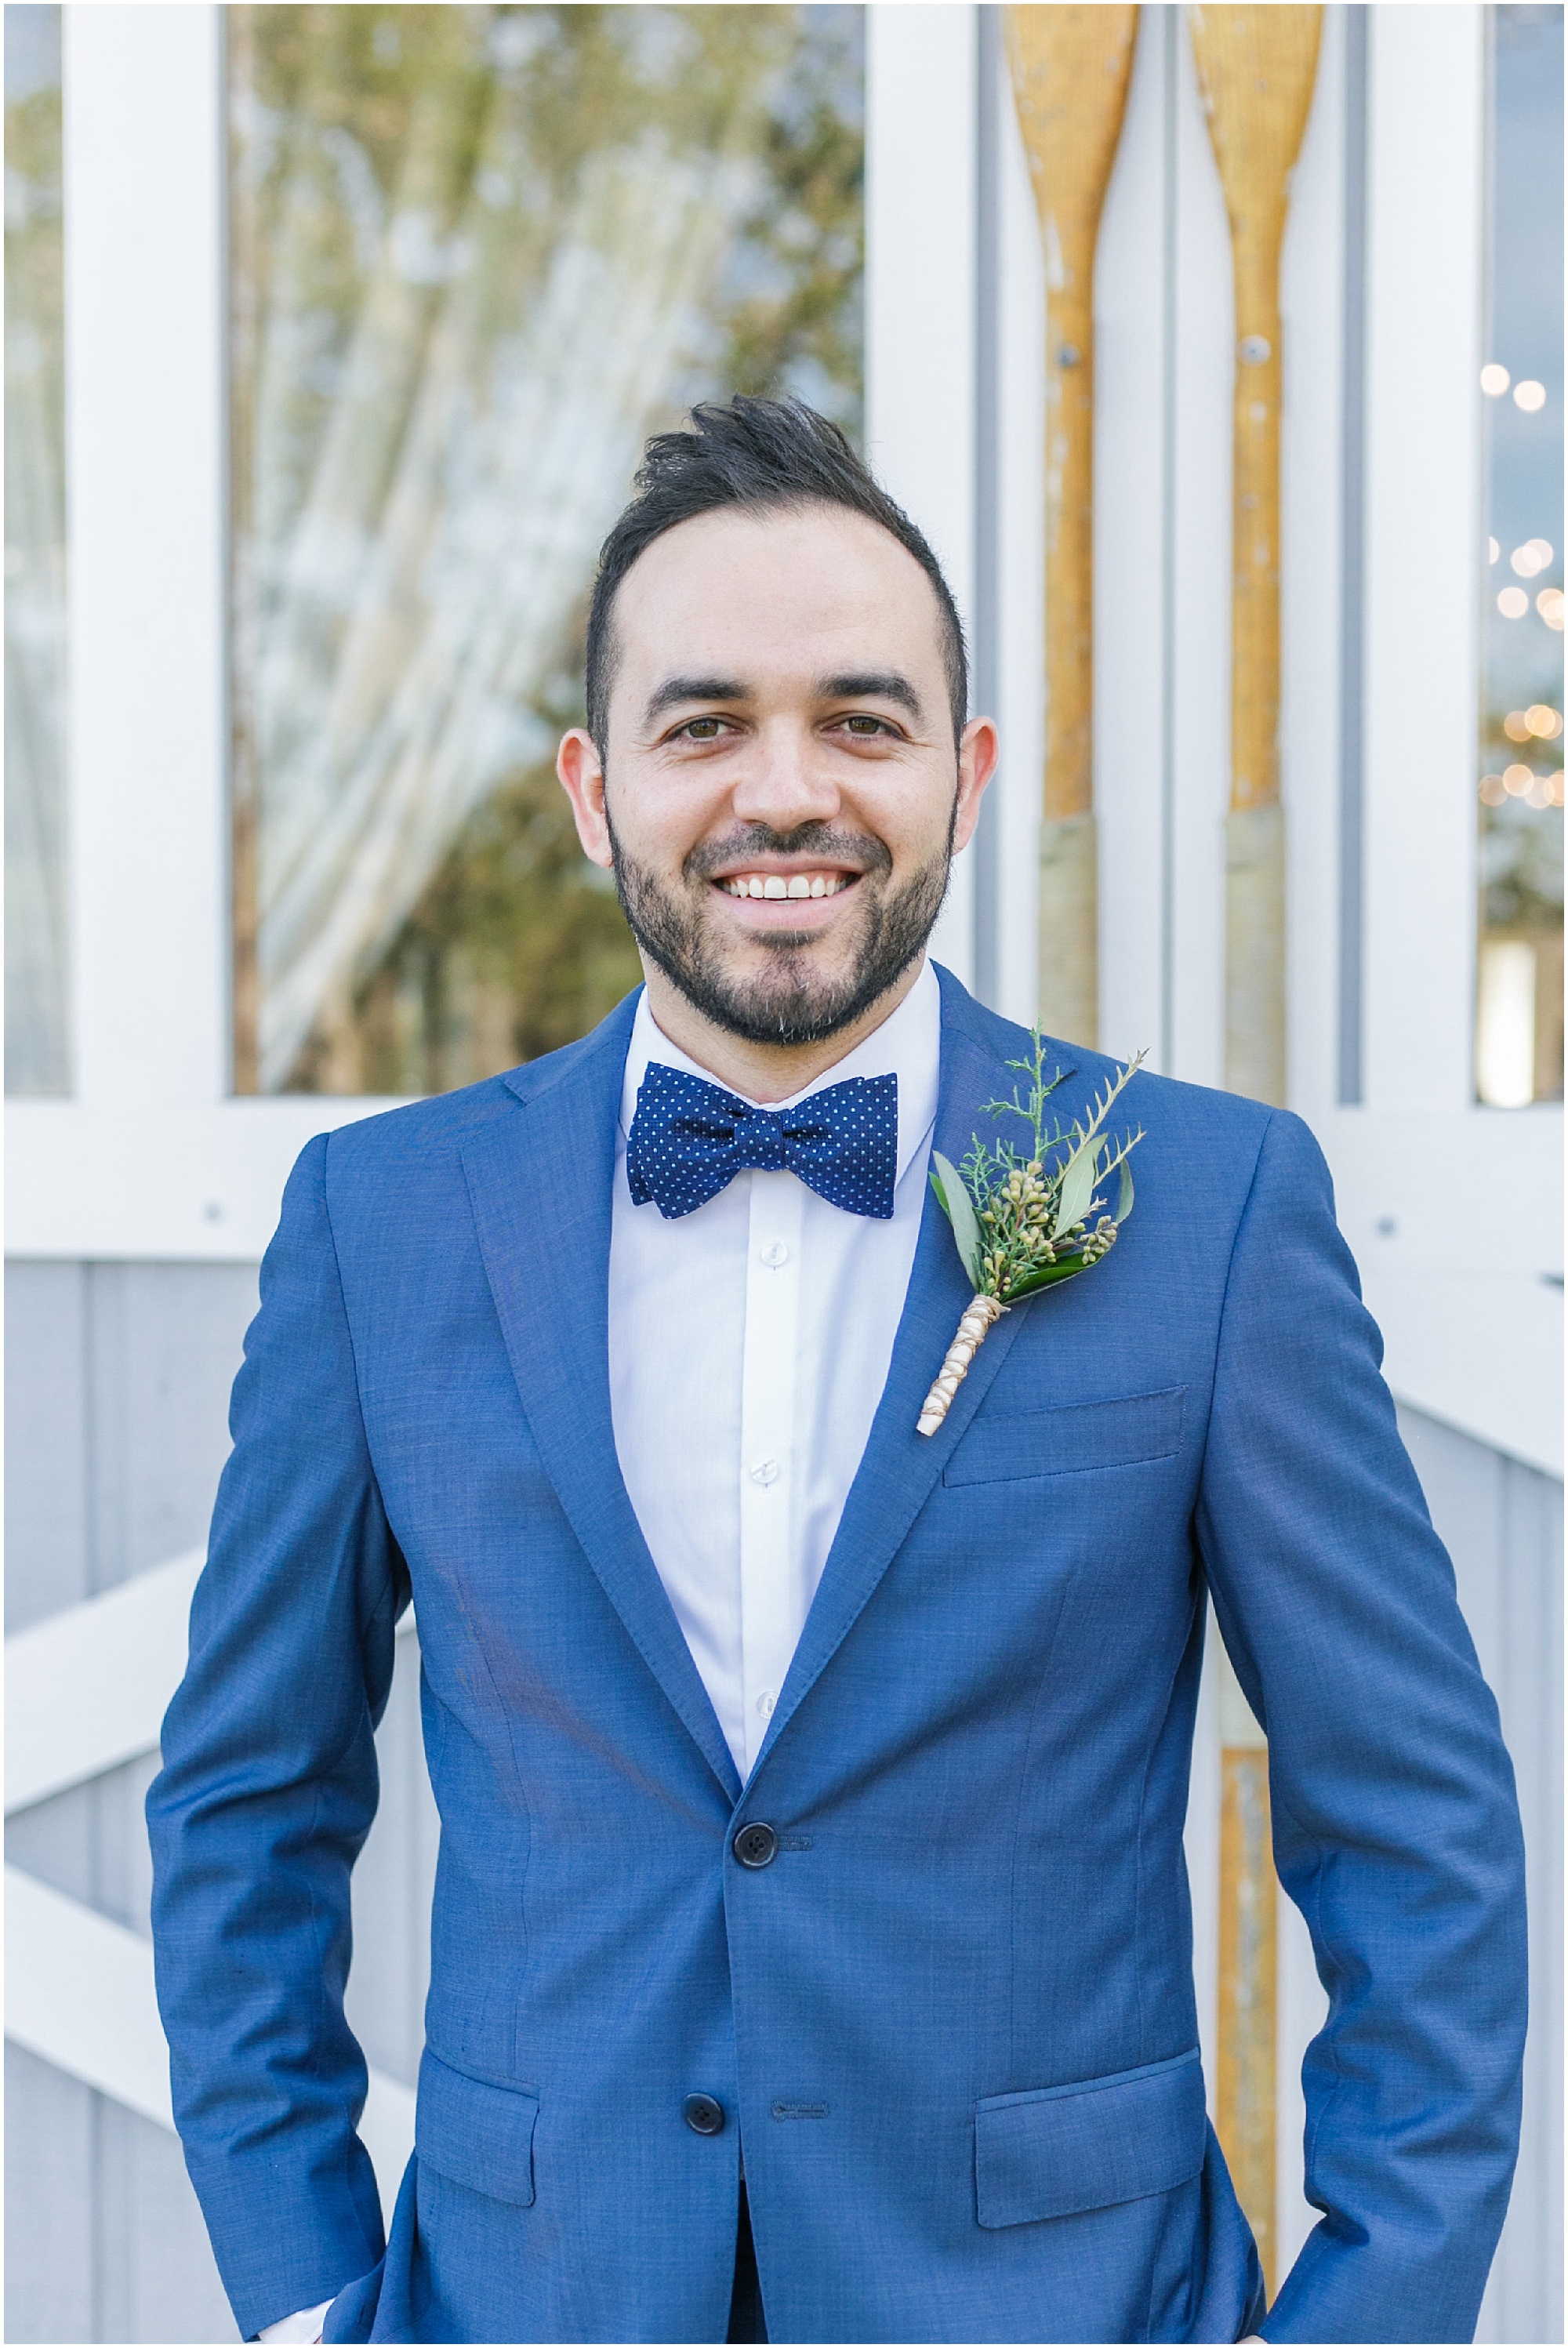 Groom in blue suit on wedding day